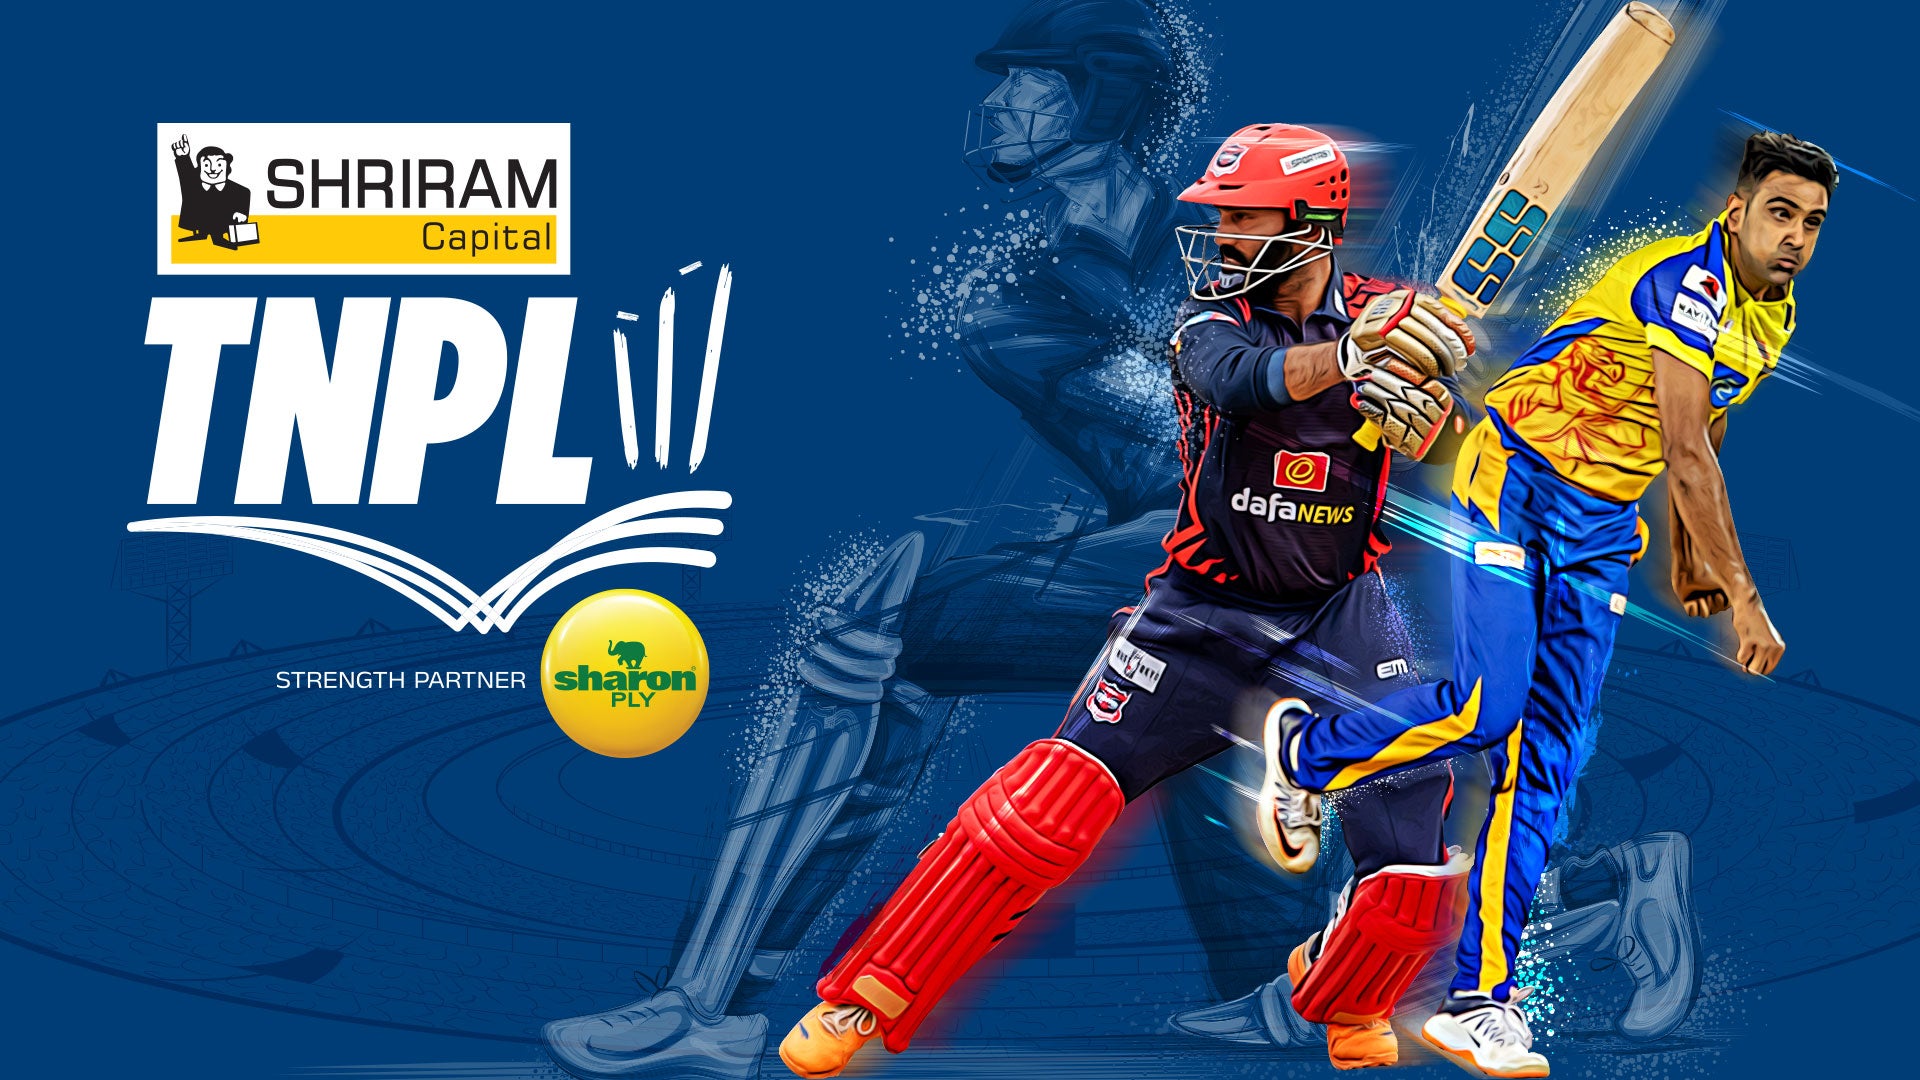 Tamil Nadu Premier League TV Show Watch All Seasons, Full Episodes and Videos Online In HD Quality On JioCinema